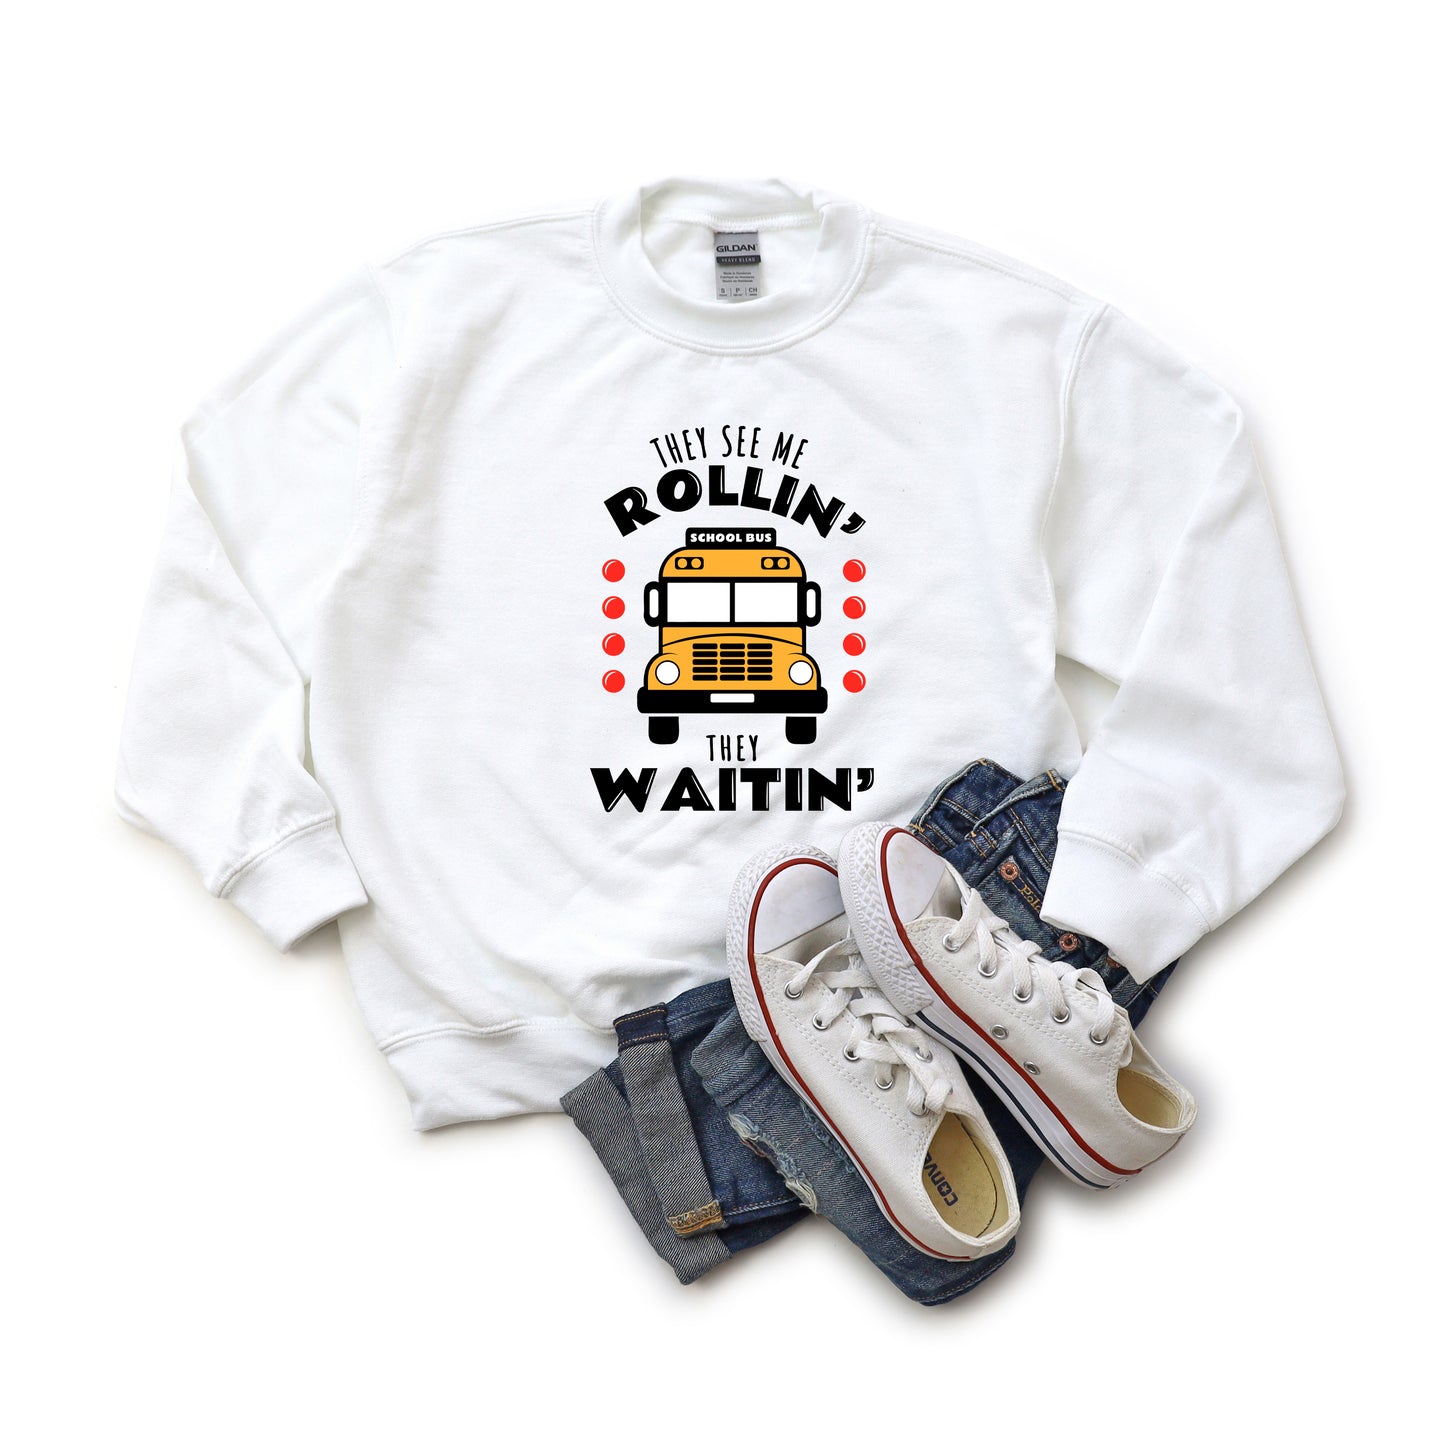 They See Me Rollin' | Youth Graphic Sweatshirt